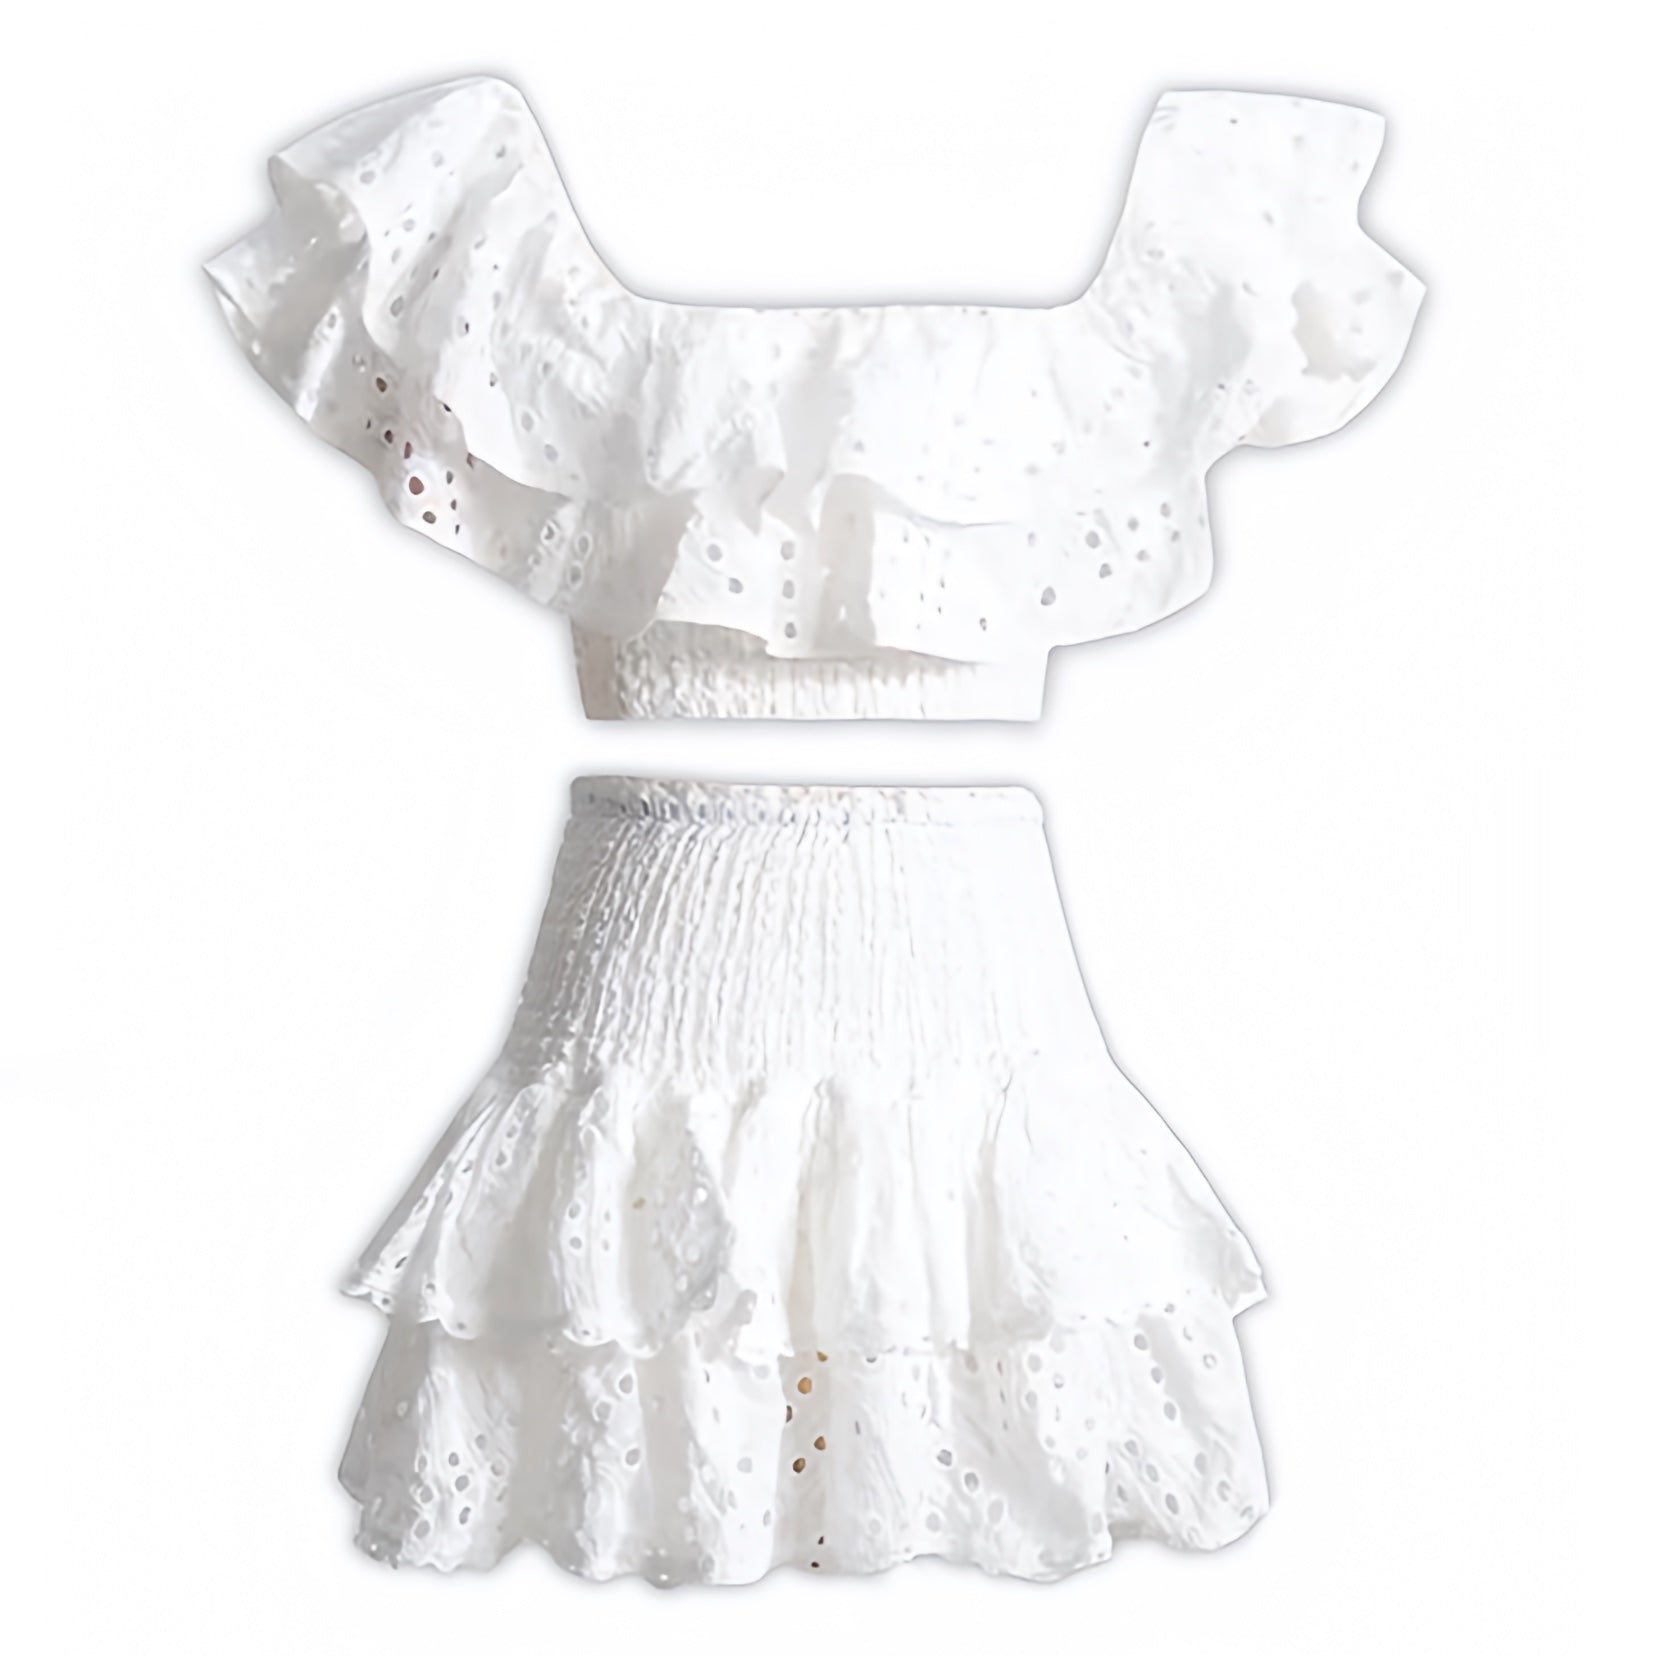 white-ivory-eyelet-embroidered-scalloped-broderie-anglaise-patterned-layered-ruffle-smocked-tiered-shirred-bodice-fitted-waist-bodycon-slim-fit-short-sleeve-off-shoulder-square-neck-line-crop-top-blouse-mini-skirt-2-piece-dress-set-couture-women-ladies-spring-2024-summer-chic-trendy-elegant-casual-semi-formal-feminine-classy-preppy-style-party-prom-european-beach-wear-vacation-sundress-gown-charo-ruiz-zimmerman-revolve-loveshackfancy-fillyboo-cb-positano-dupe